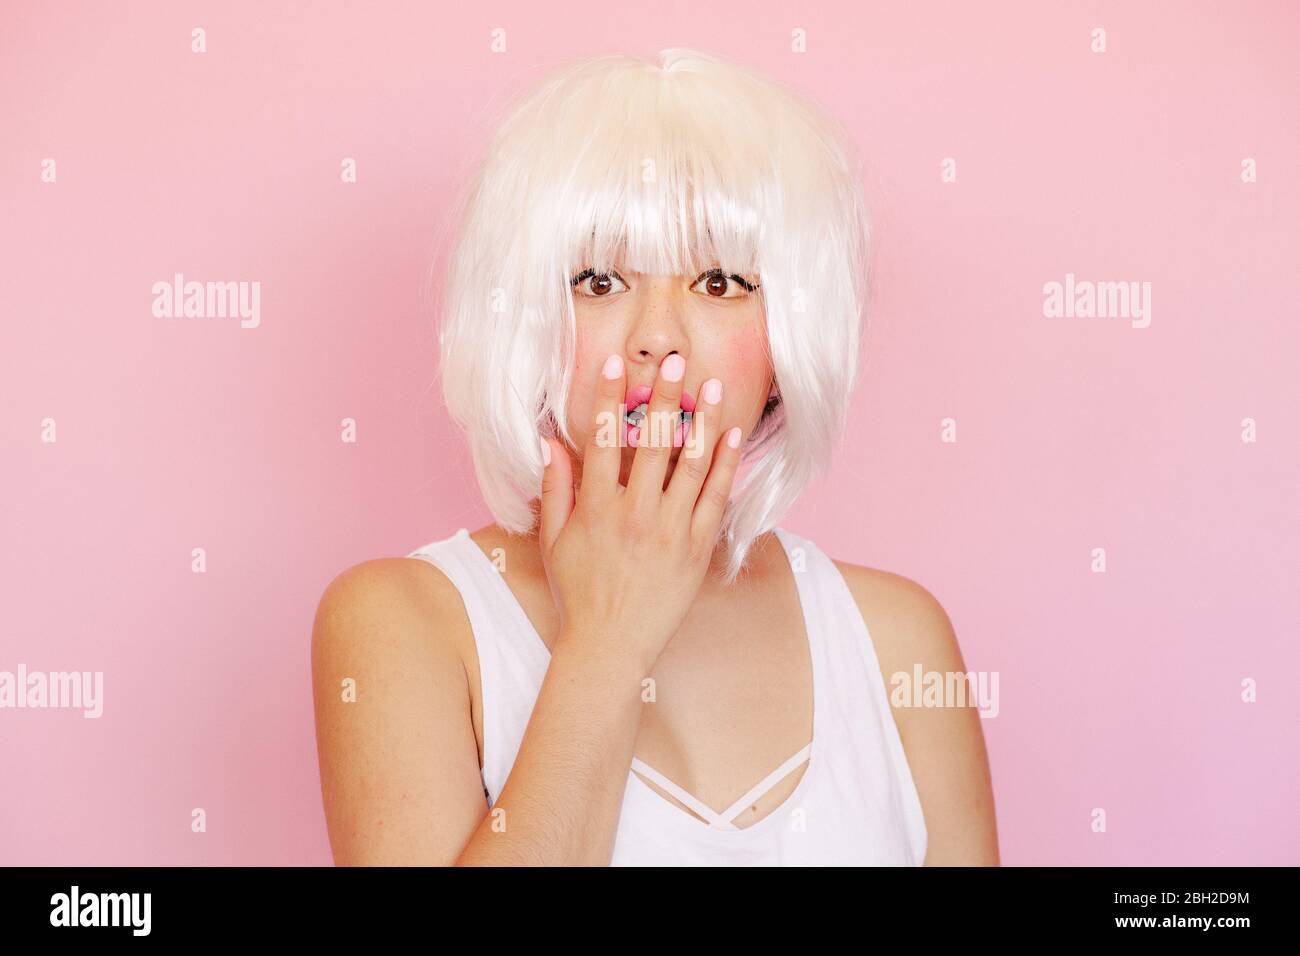 Portrait of frightened young woman with hand covering mouth in front of pink background Stock Photo